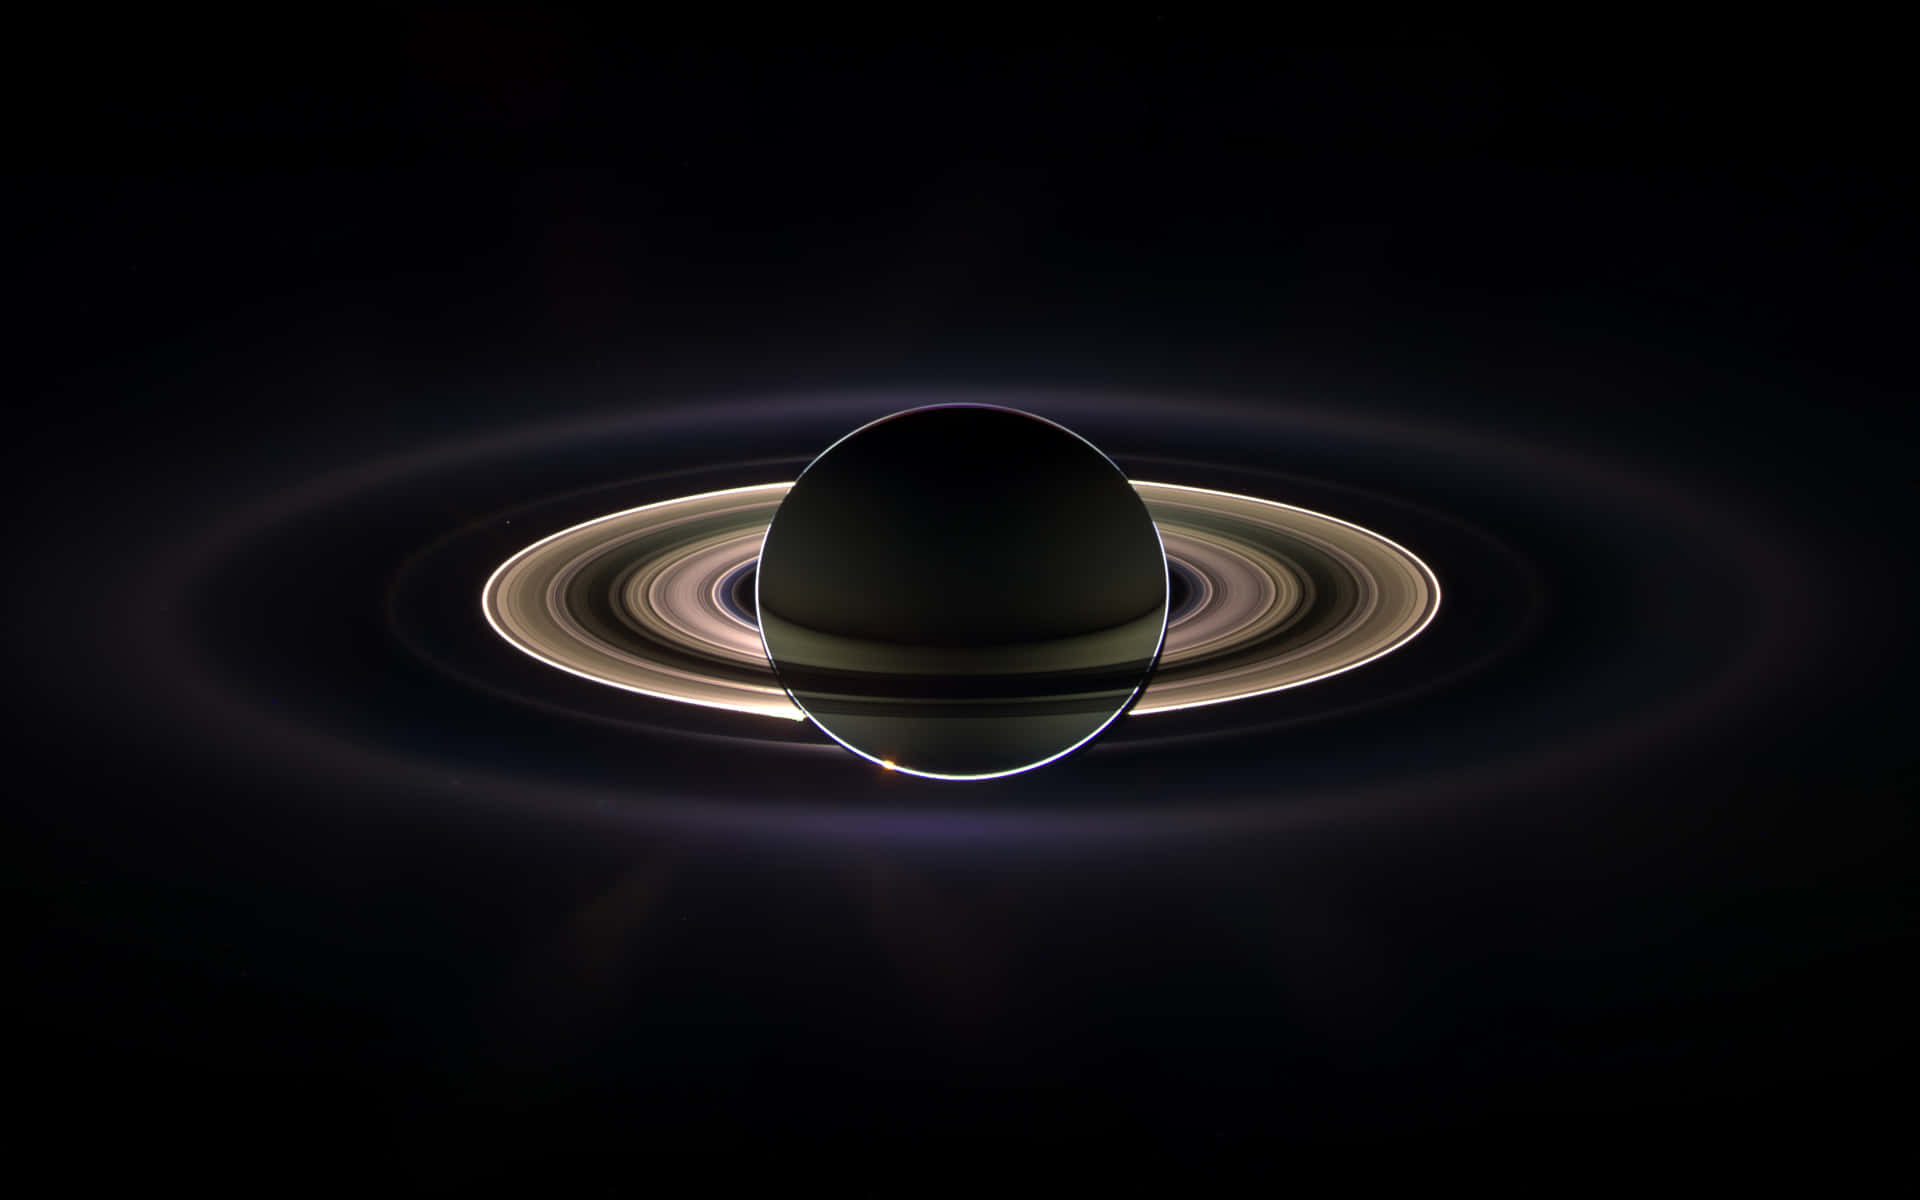 Stunning view of the magnificent planet Saturn in outer space